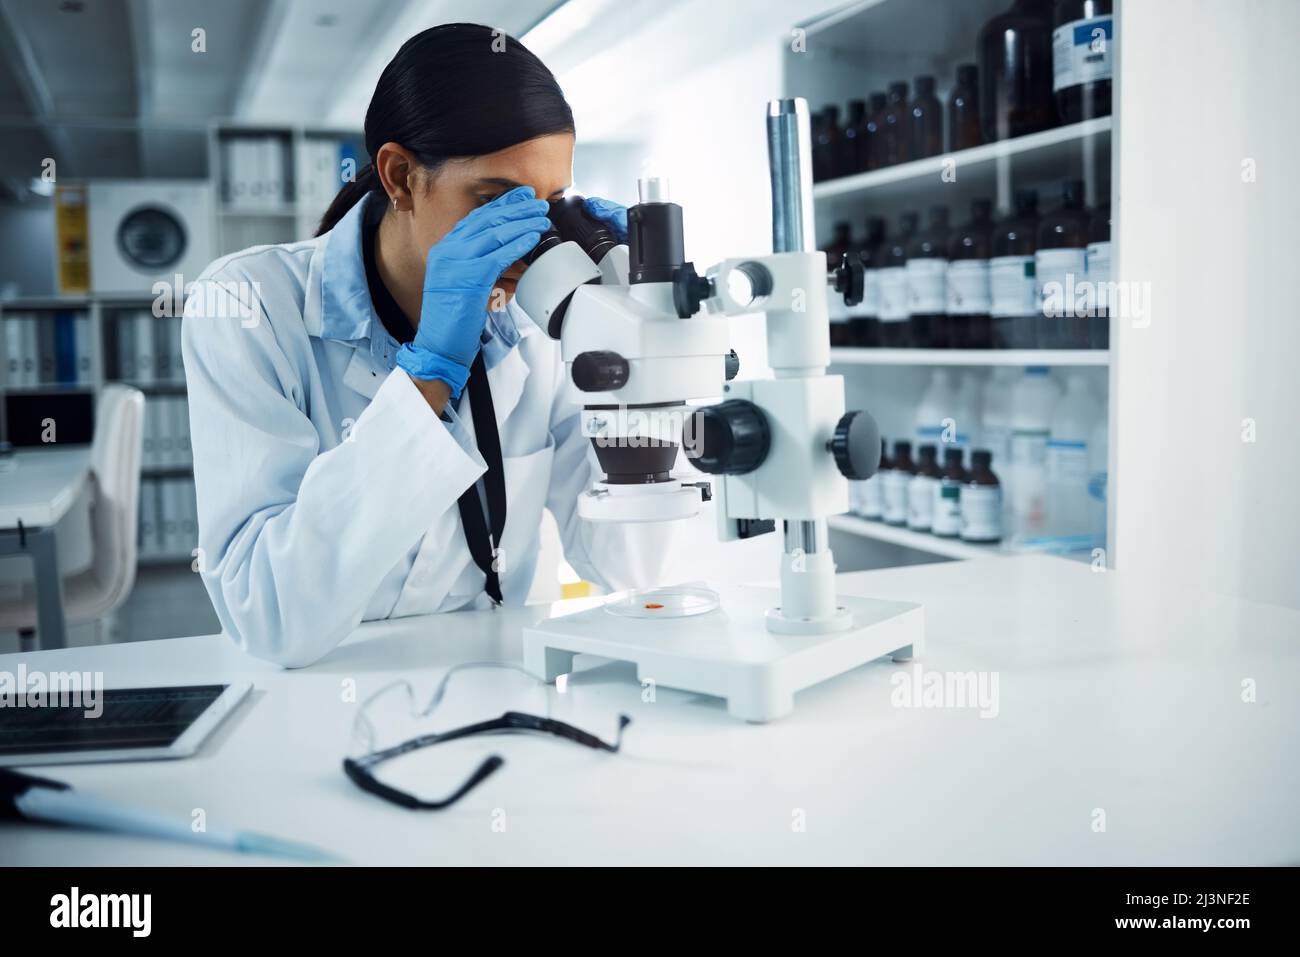 Ill find you and Ill fix you. Shot of a young scientist using a microscope in a laboratory. Stock Photo